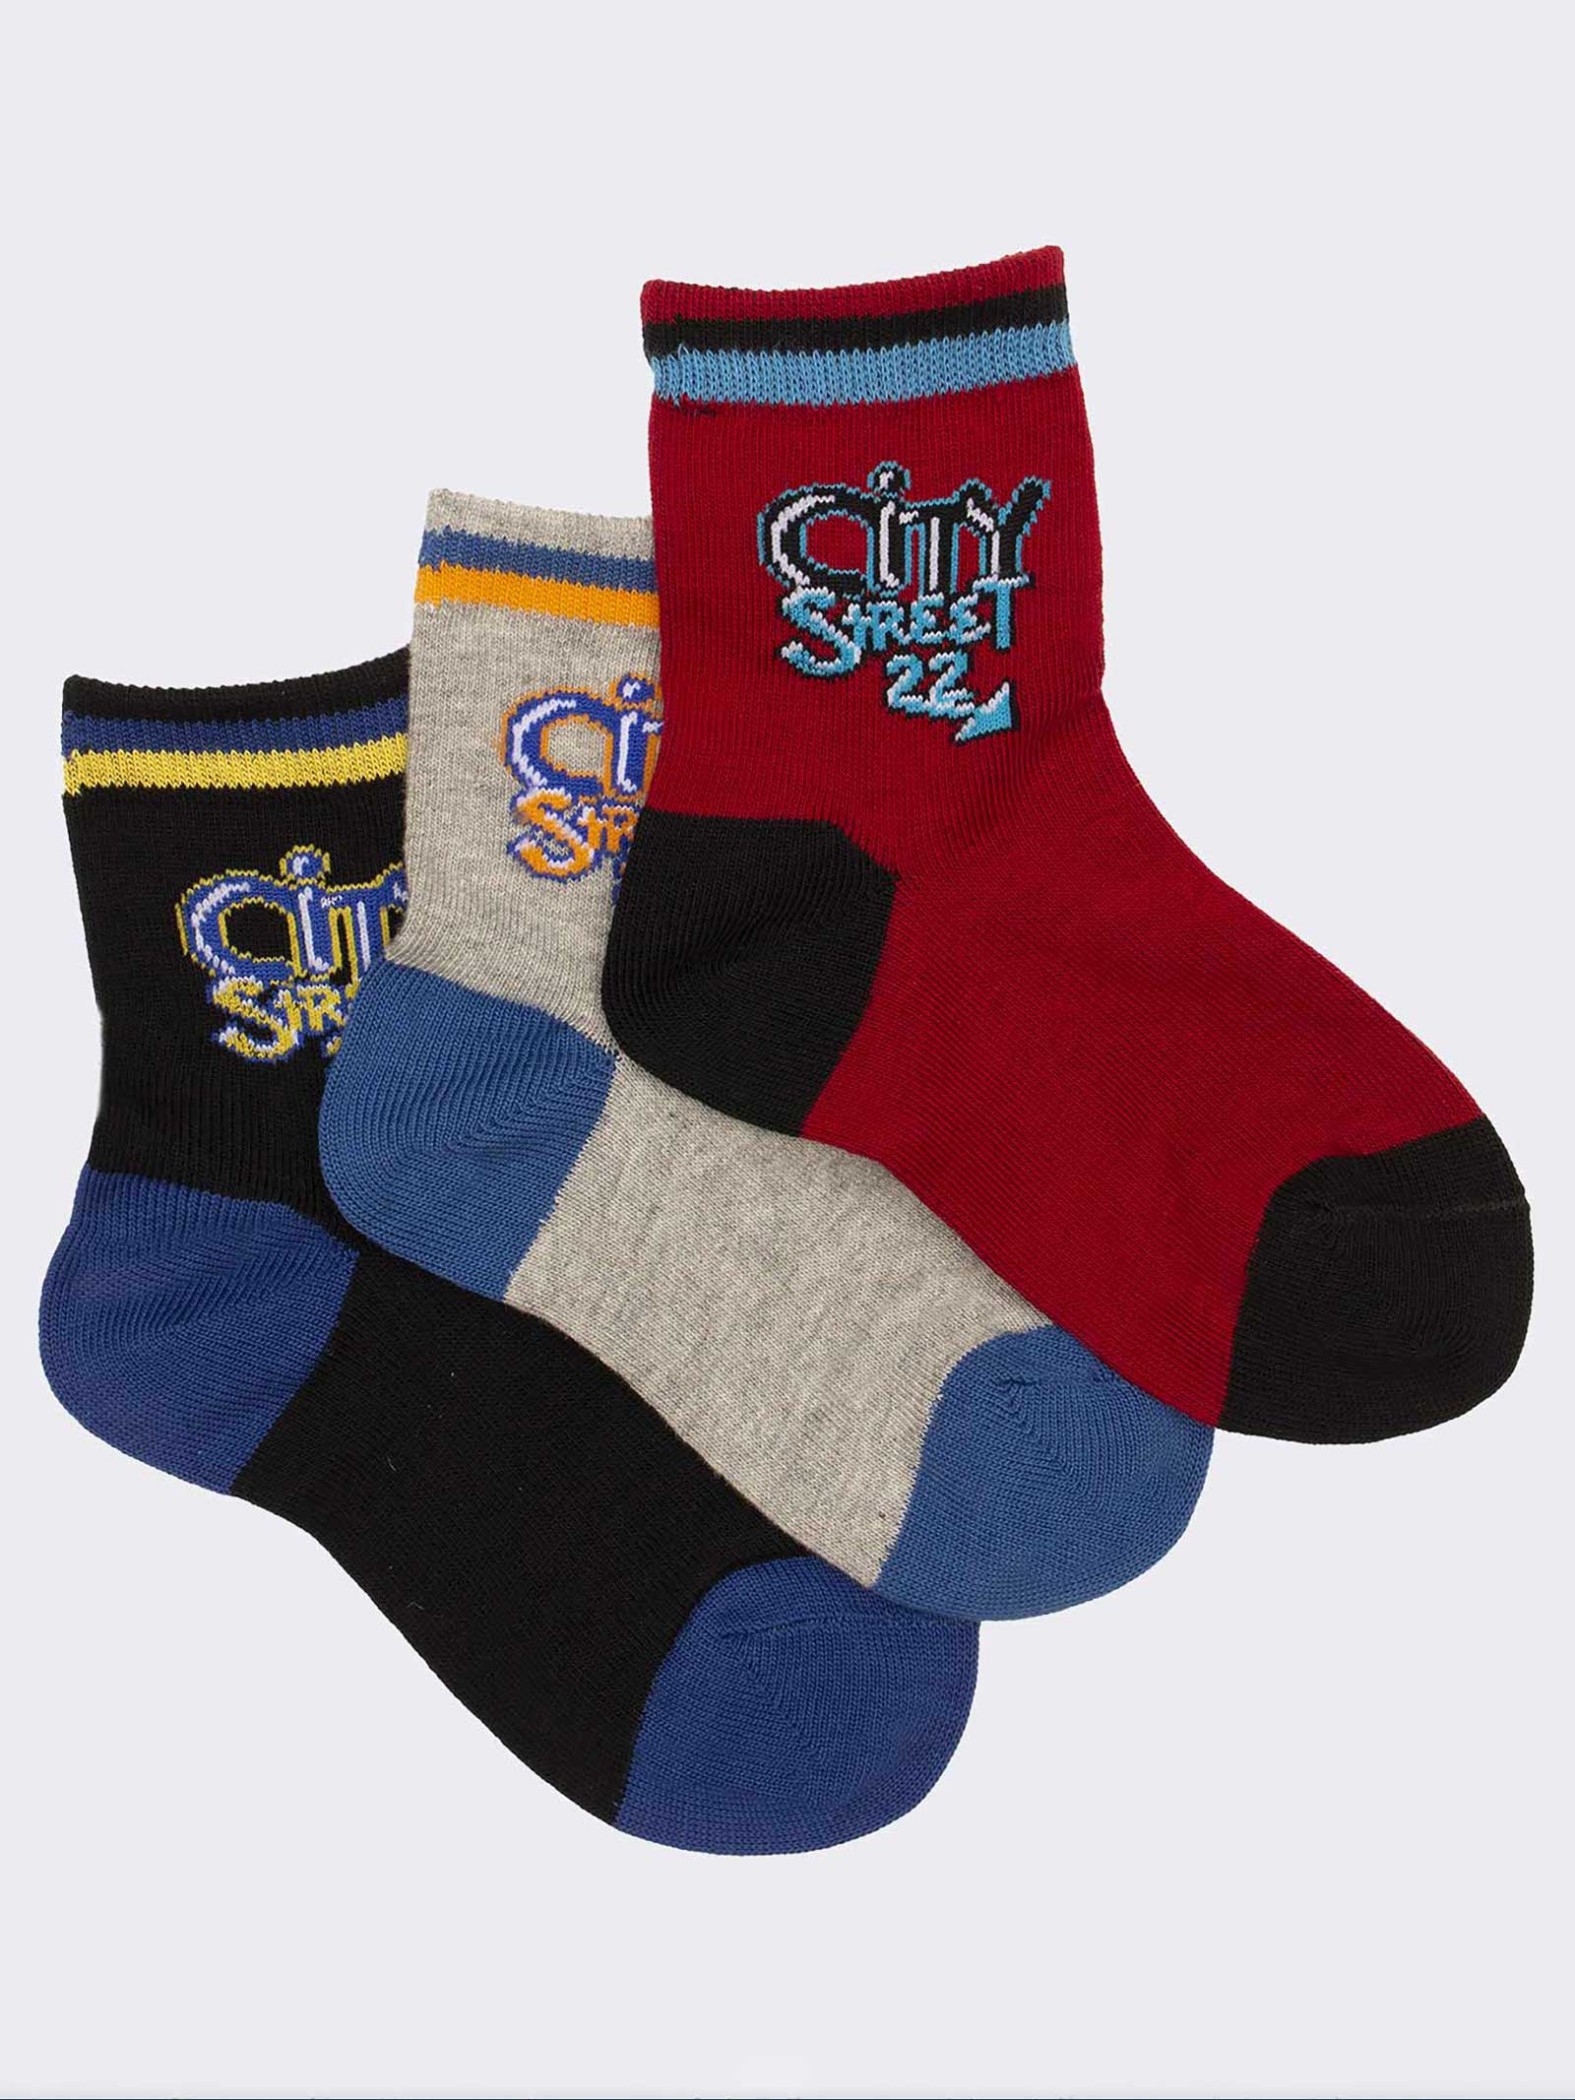 Trio of City street patterned children's calf socks in warm cotton